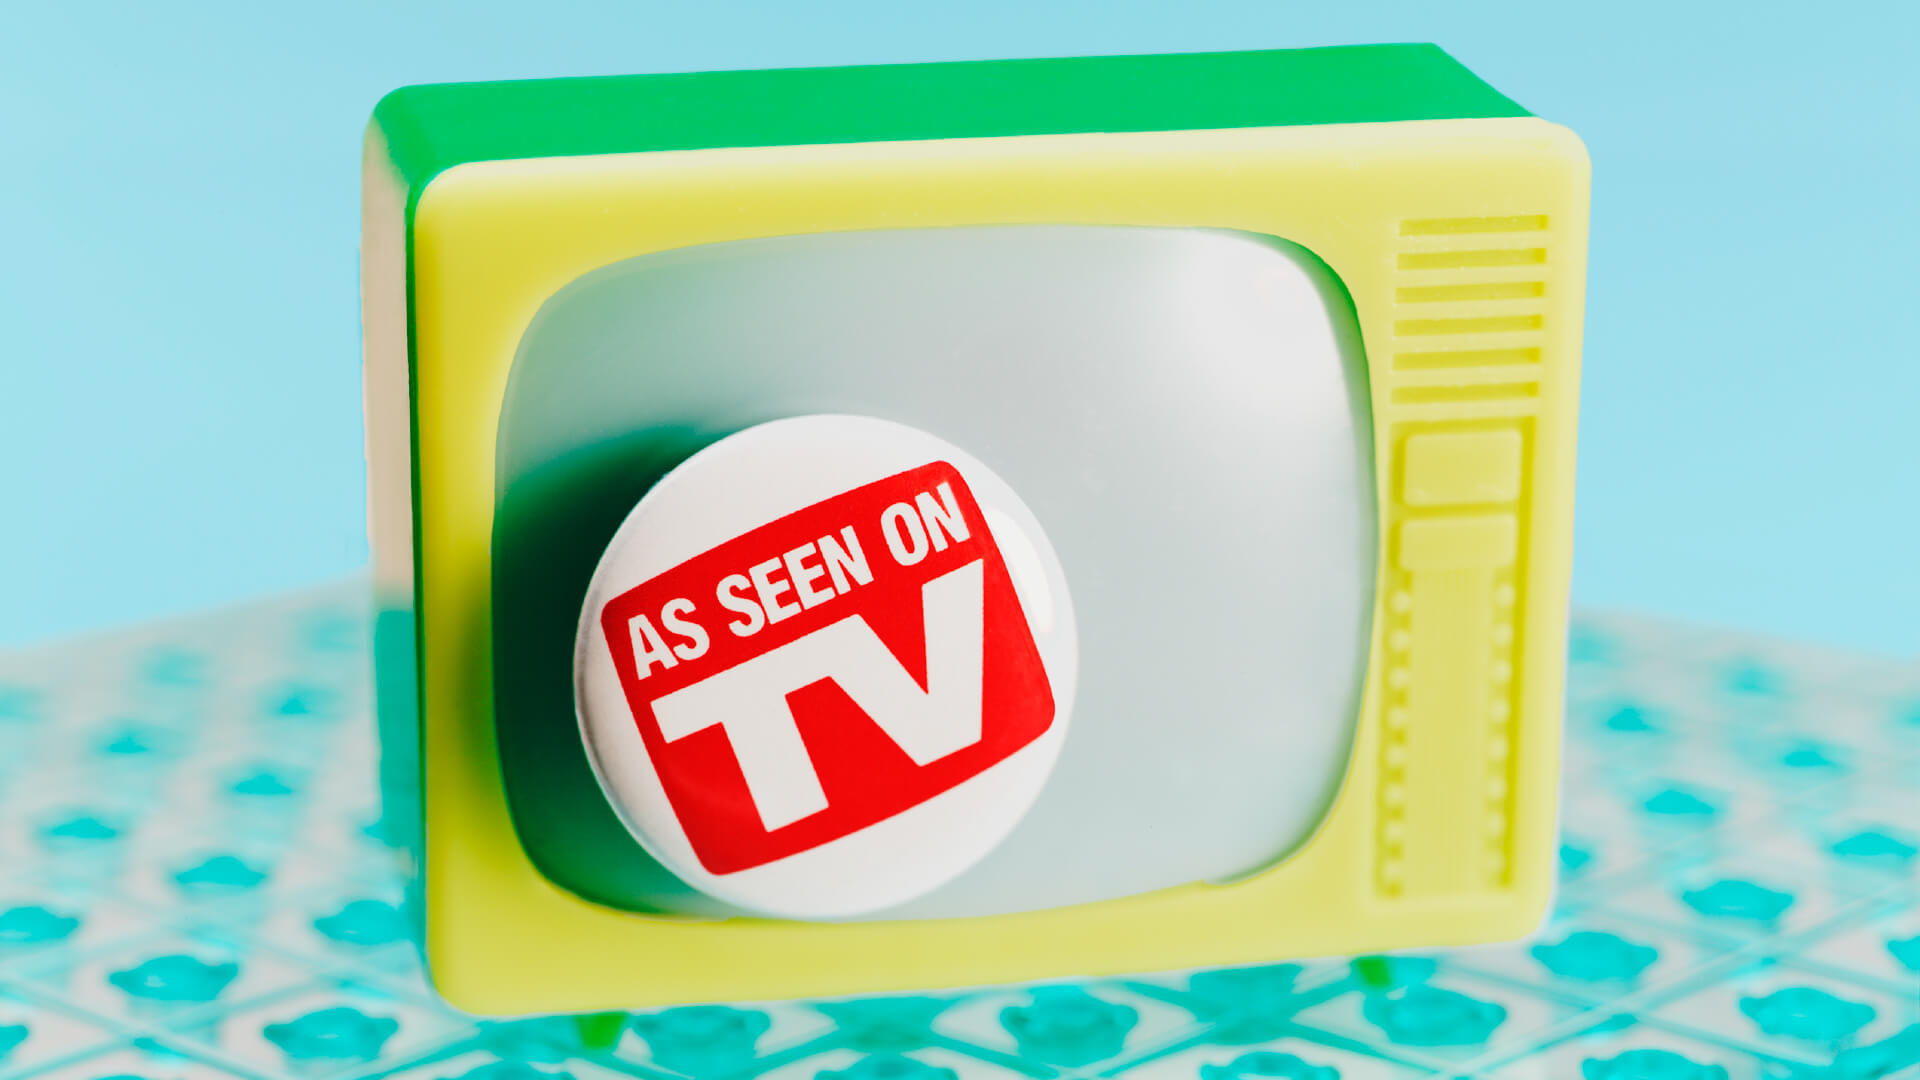 25 of the BestSelling 'As Seen on TV' Products GOBankingRates